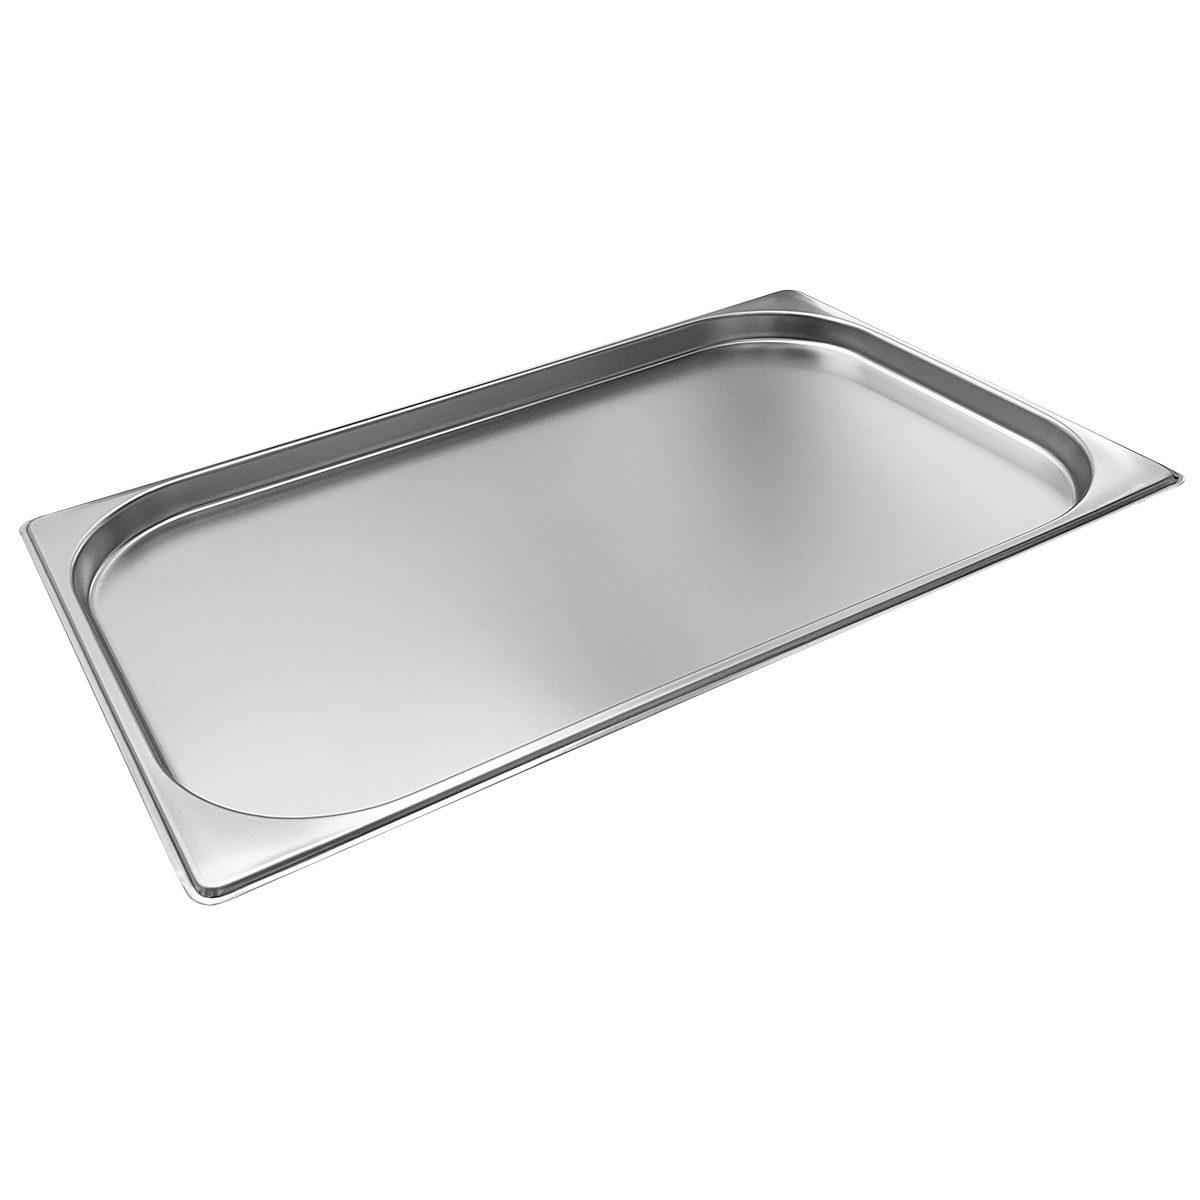 Cater-Cook 1/1 Stainless Steel Gastronorm Container 20mm Deep - CK4049